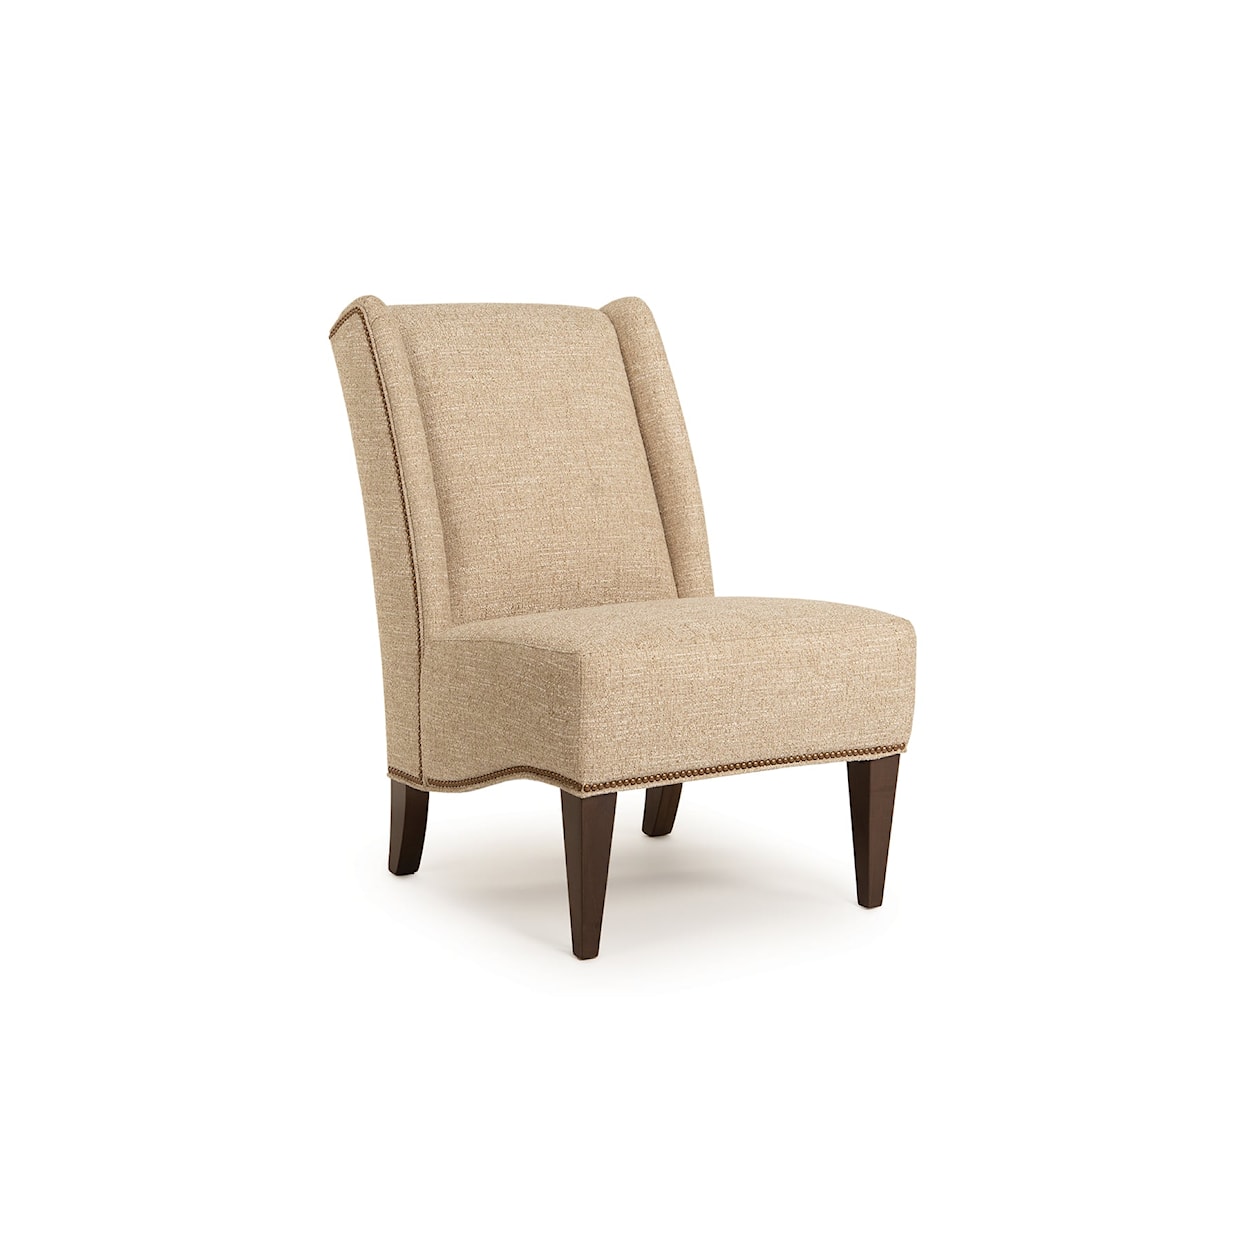 Smith Brothers 554 Accent Chair